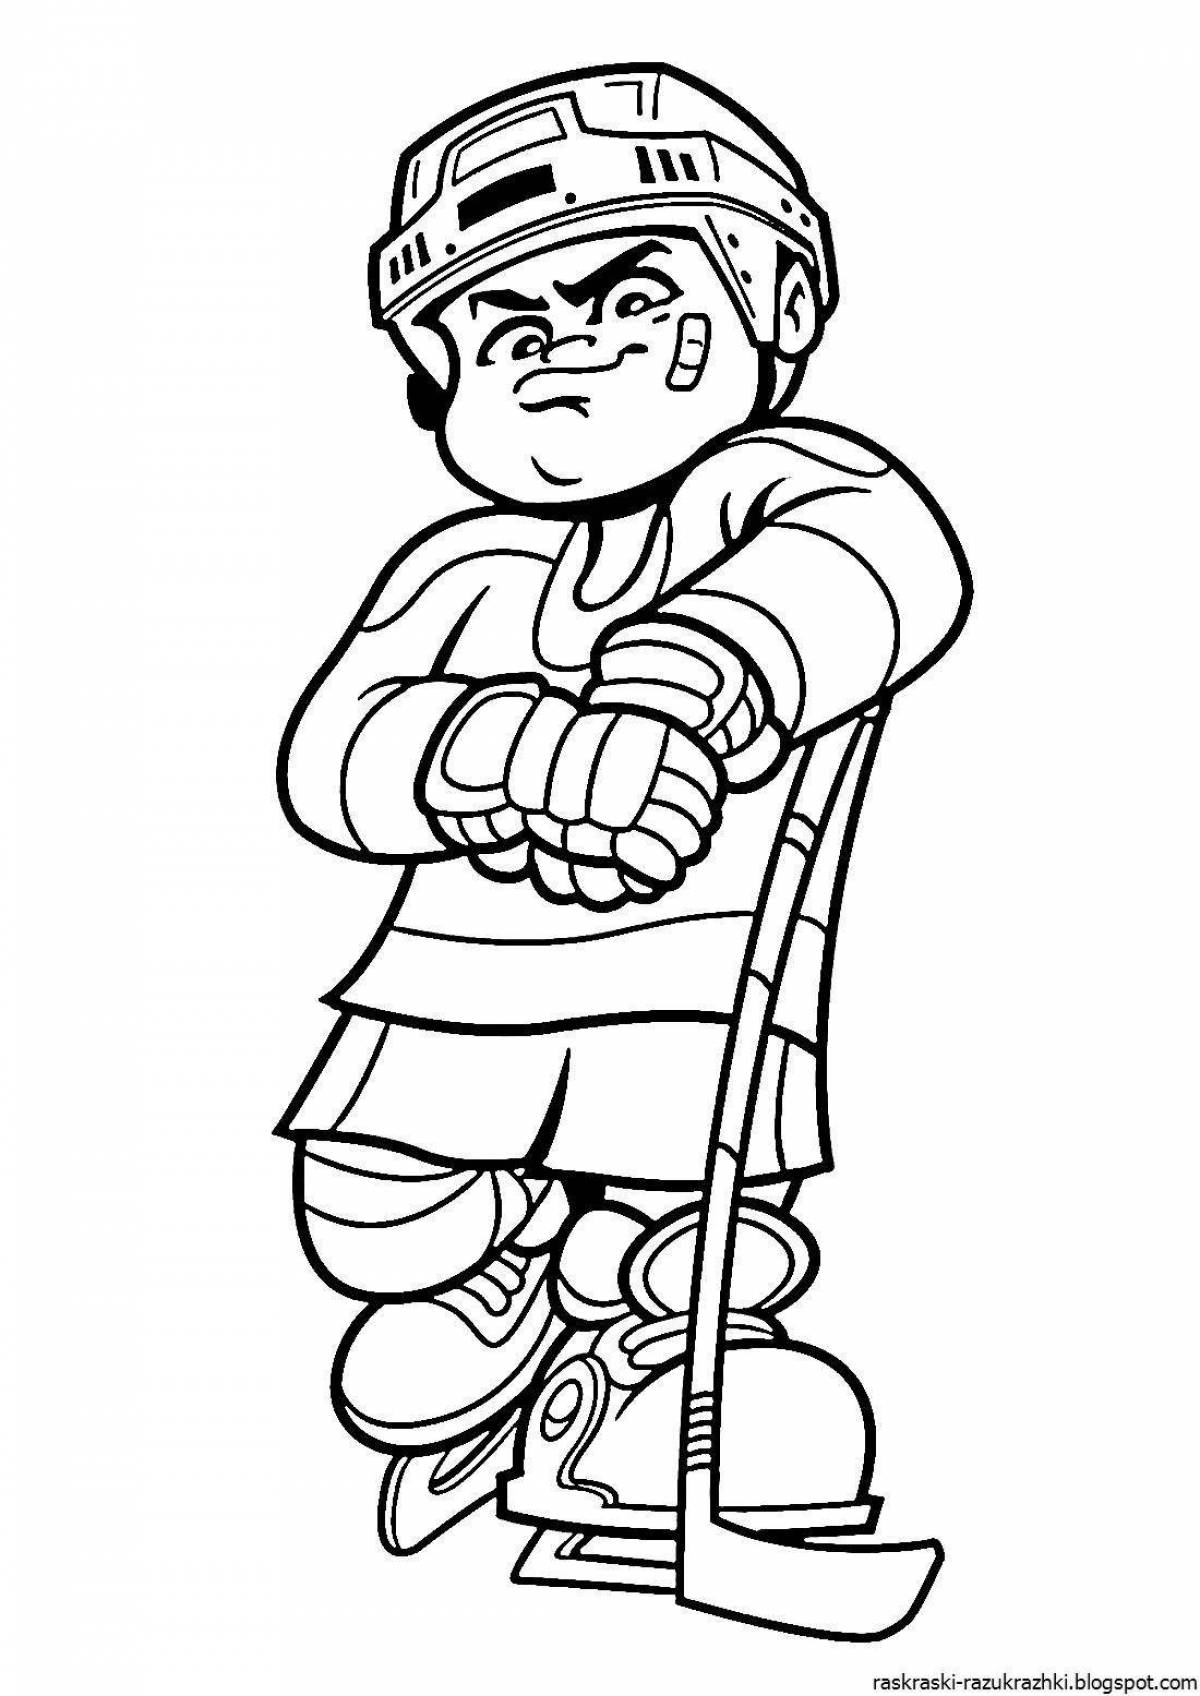 Delightful hockey coloring book for kids